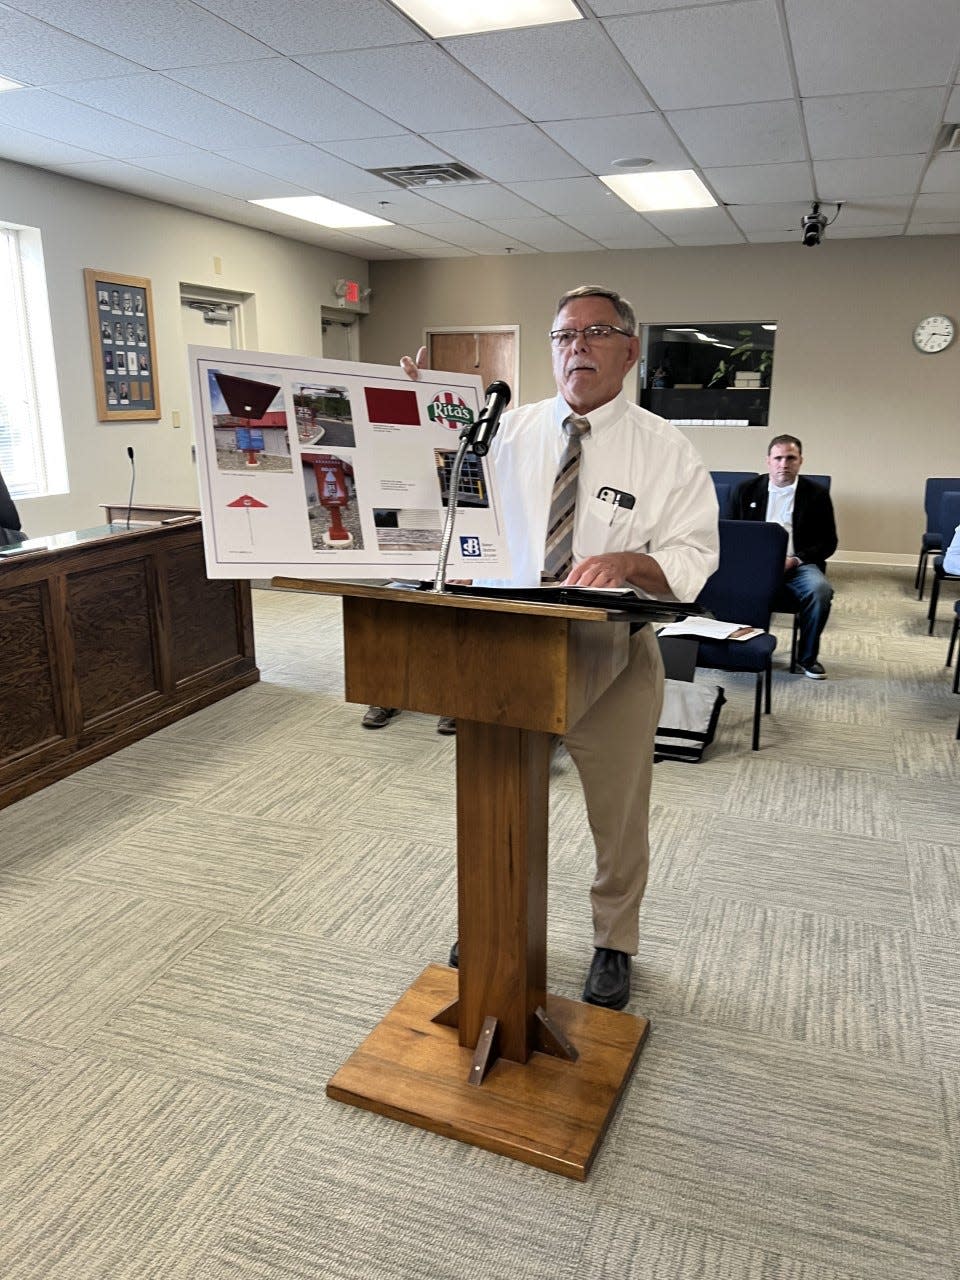 Ed Begue, an architect with Baker, Bednar, Snyder and Associates of Warren, shows off plans for an Rita's Italian Ice in Streetsboro.